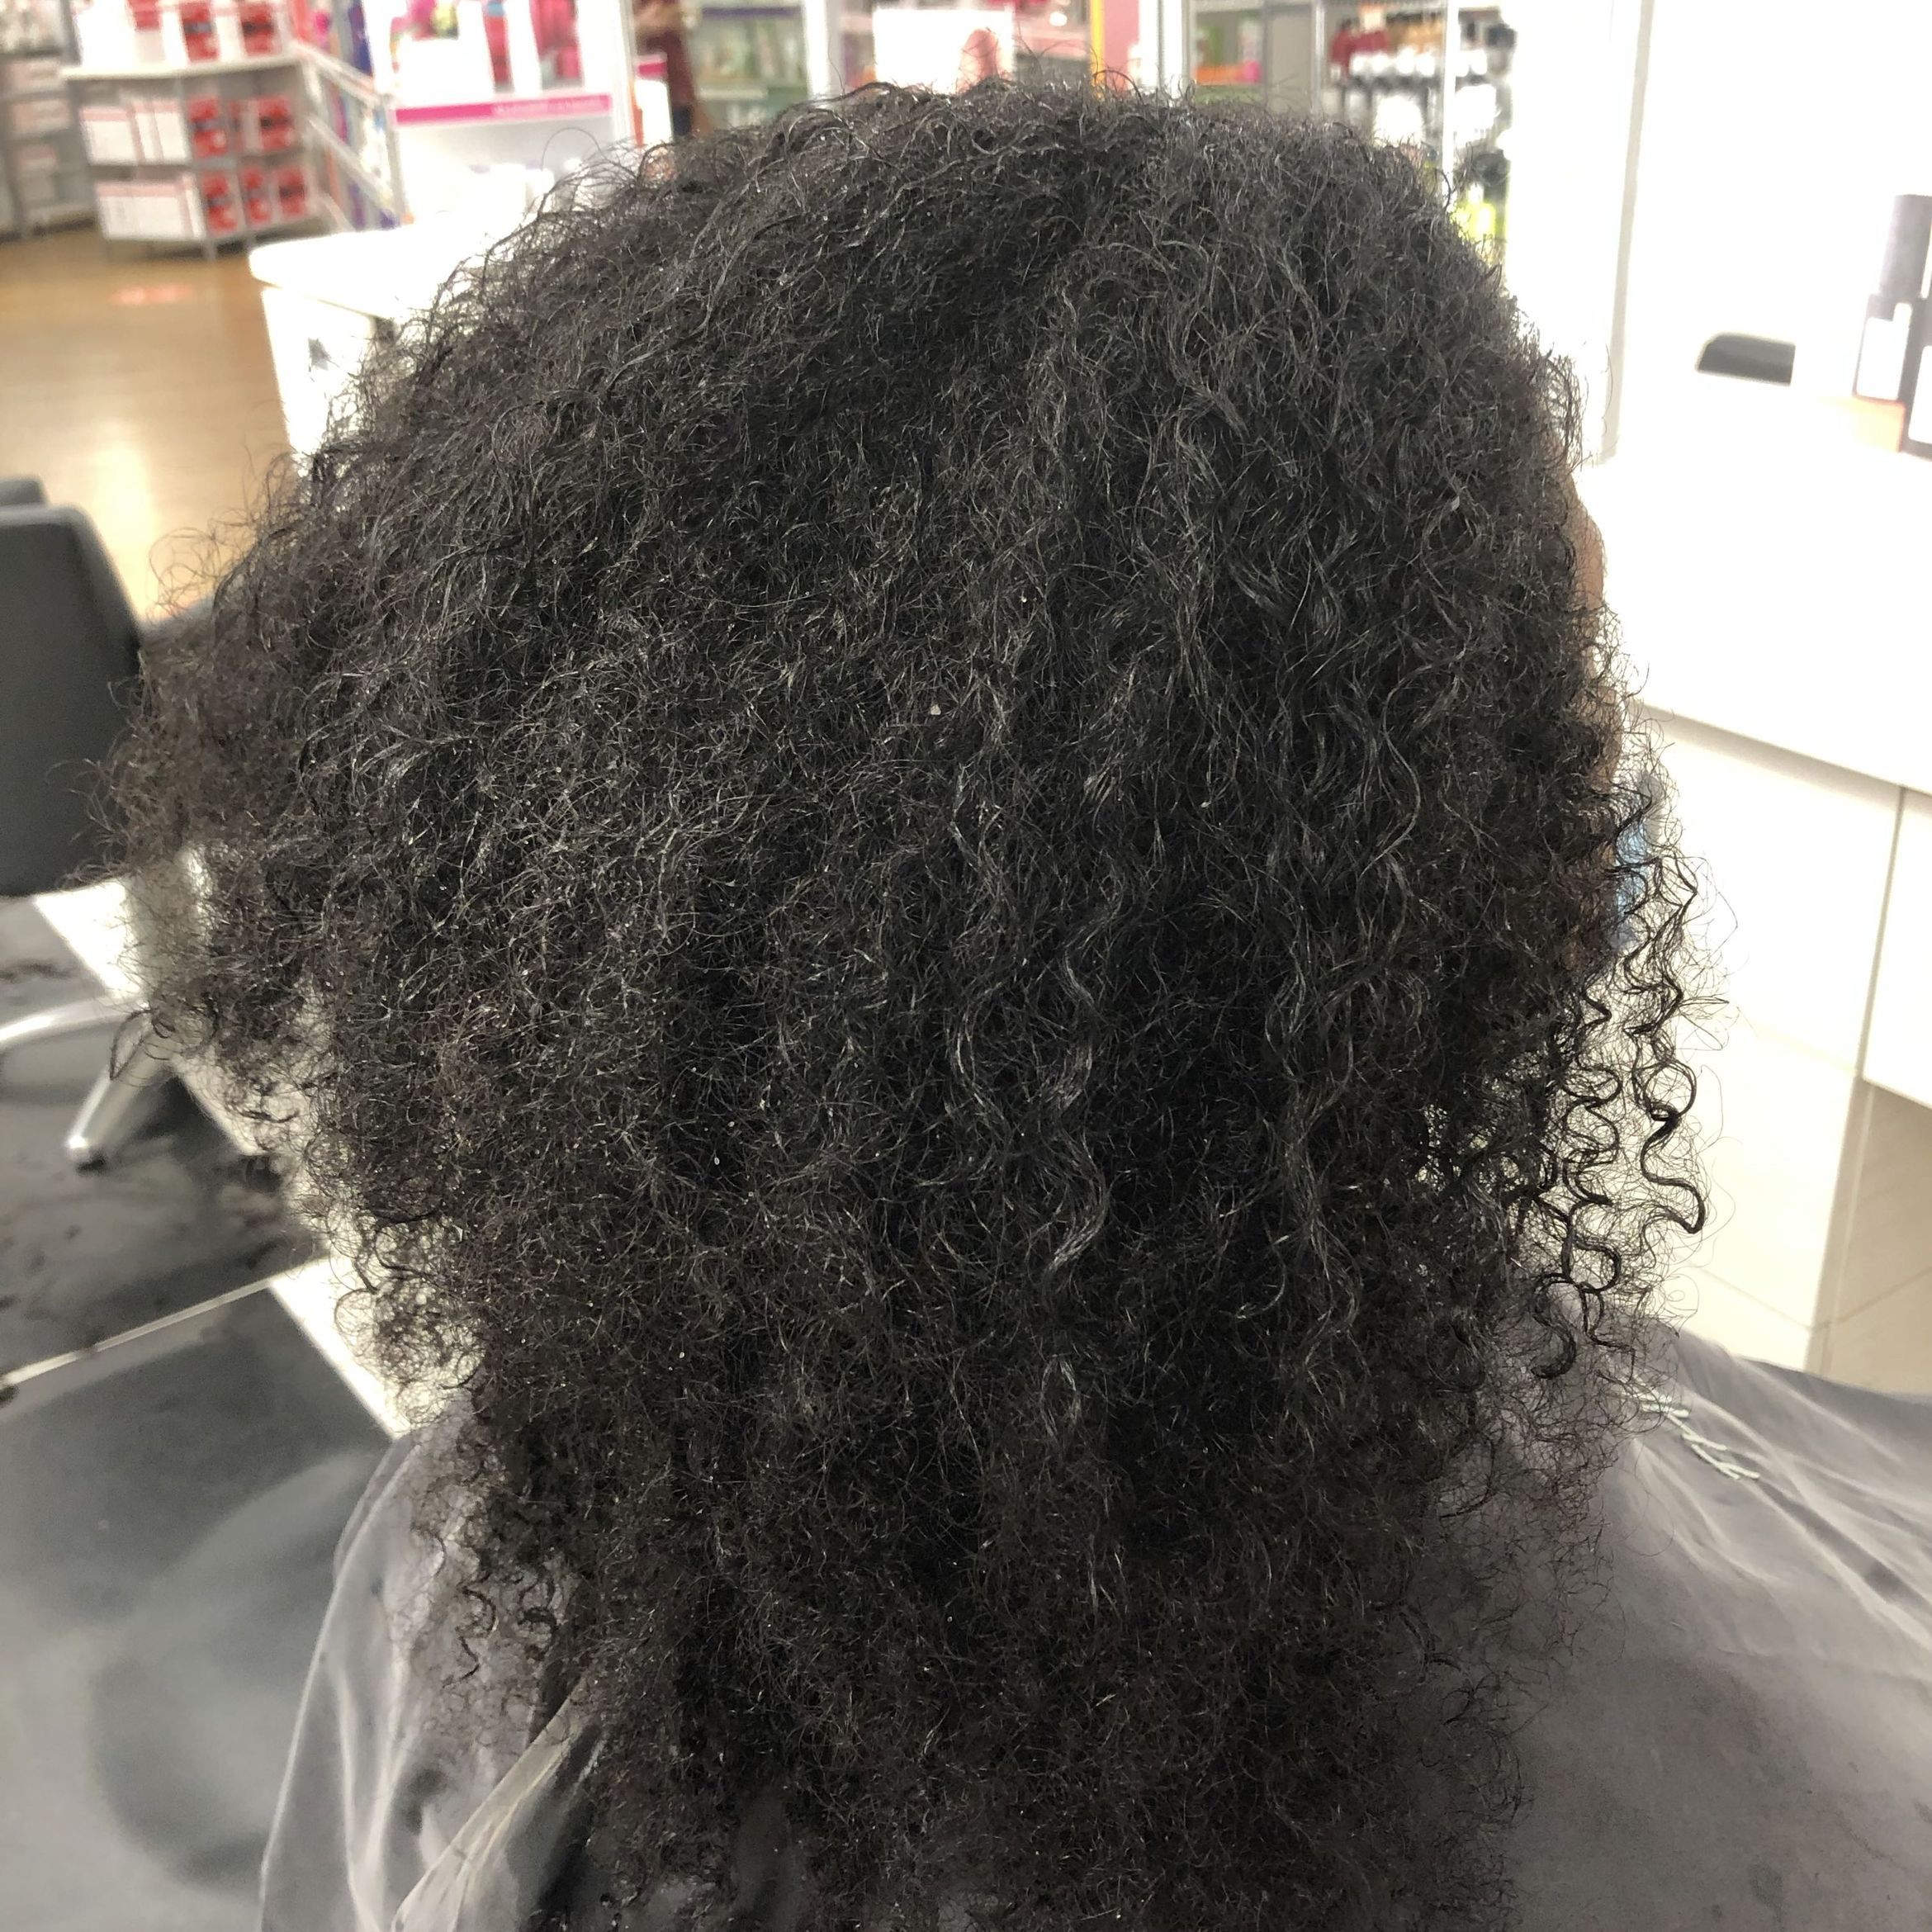 DOMINICAN BLOW DRY FOR NATURAL HAIR portfolio